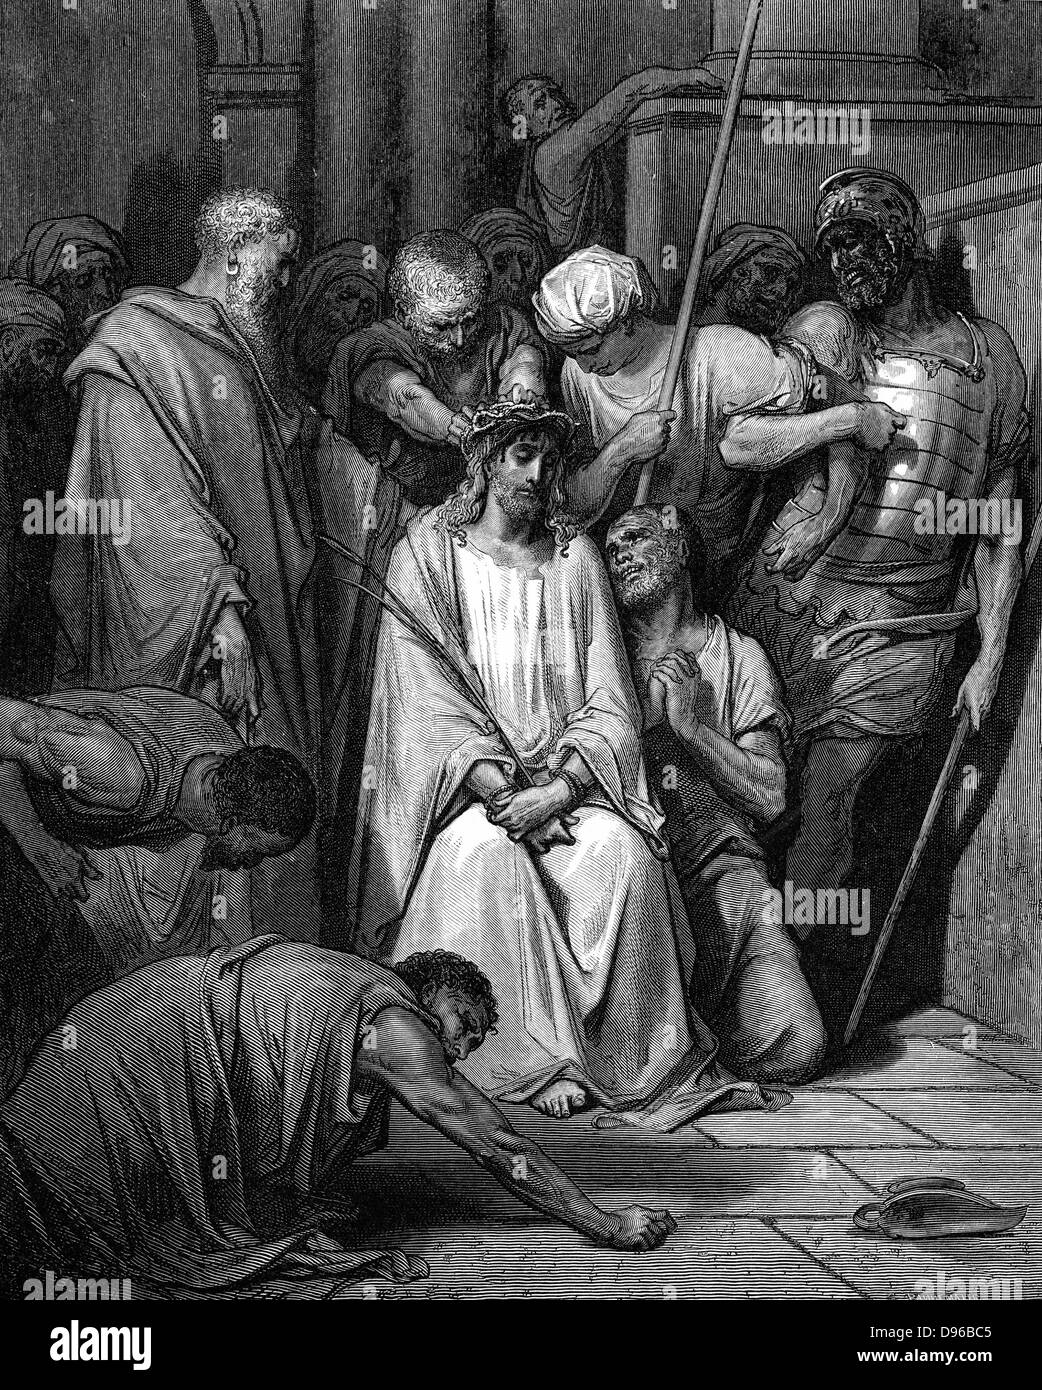 Christ mocked and the Crown of Thorns placed on his head. St John. From Gustave Dore's illustrated 'Bible', 1866. Wood engraving. Stock Photo